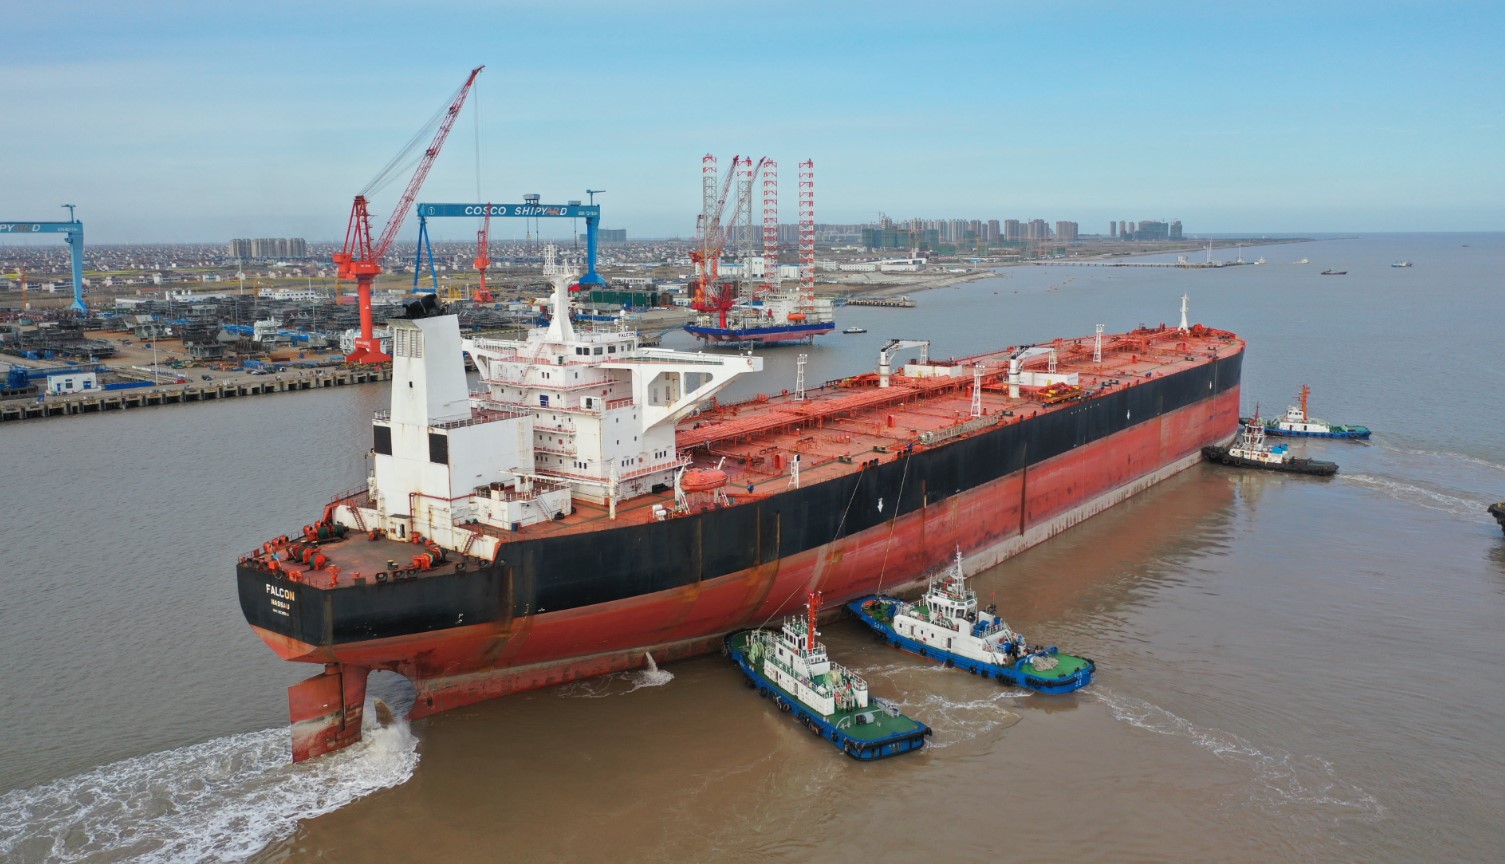 Tanker set for conversion into FPSO Anna Nery by Yinson; Source: ABB Royal IHC